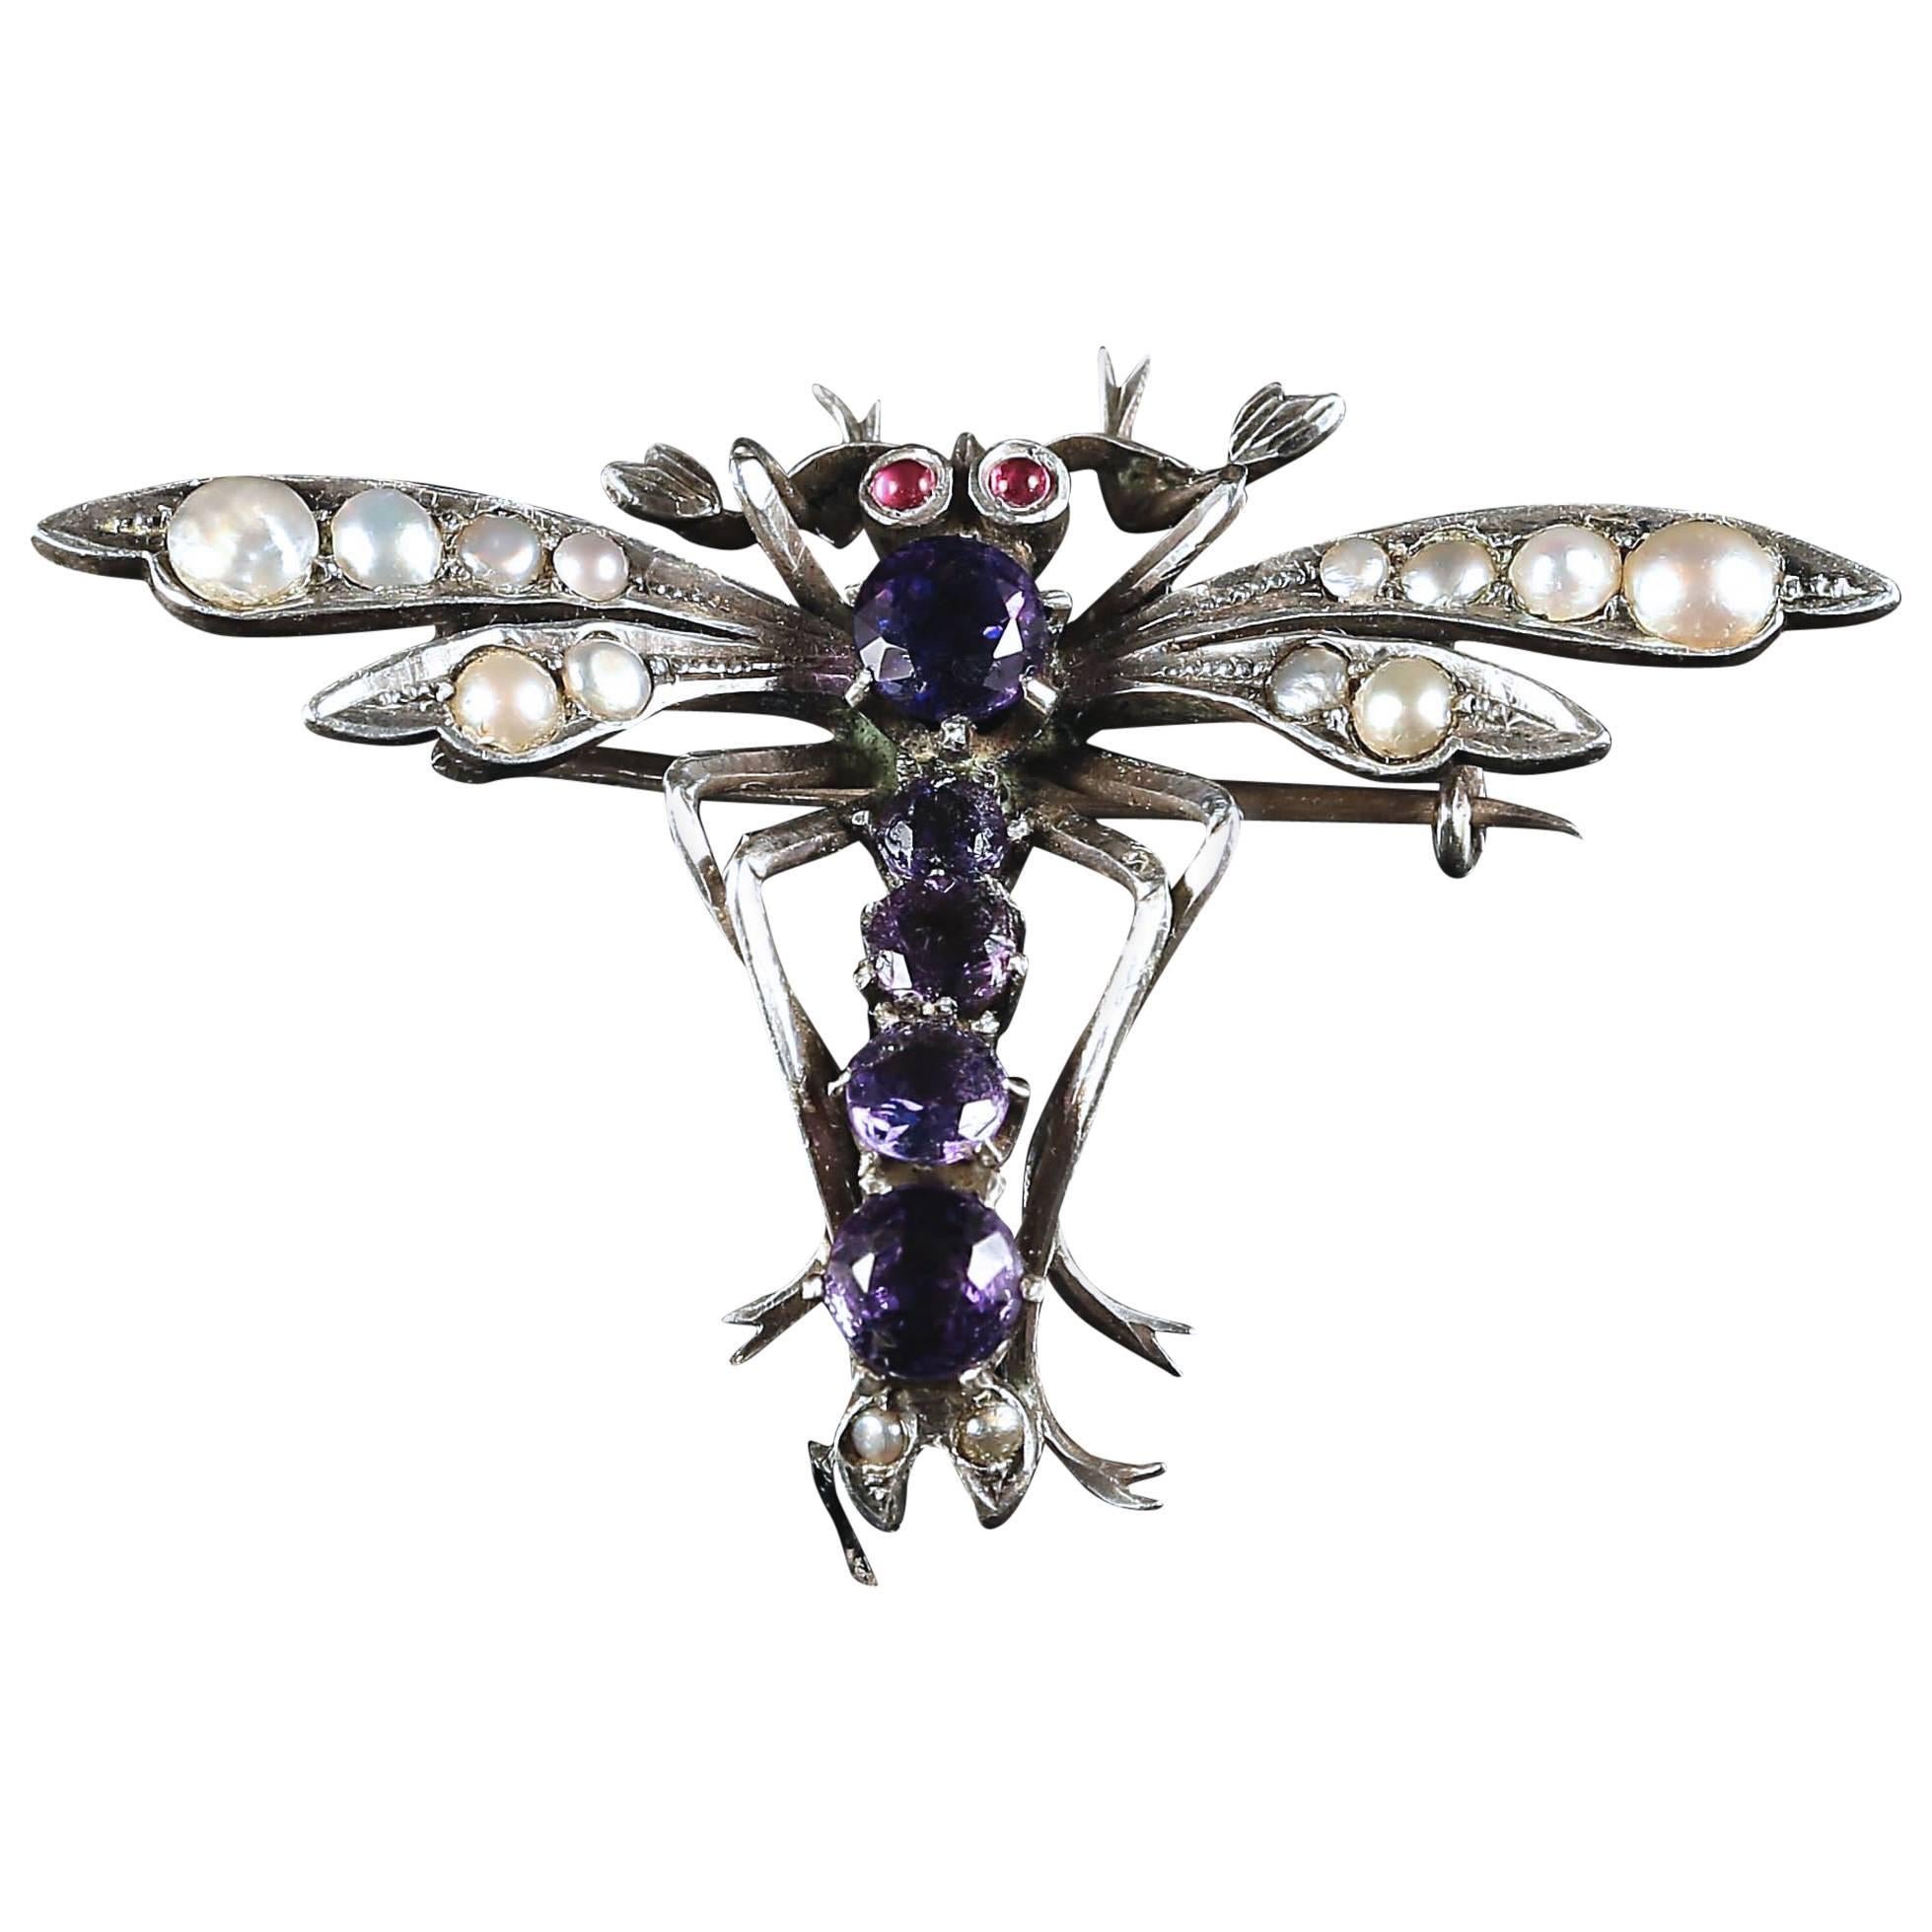 Antique Victorian Dragonfly Sterling Silver Brooch circa 1900